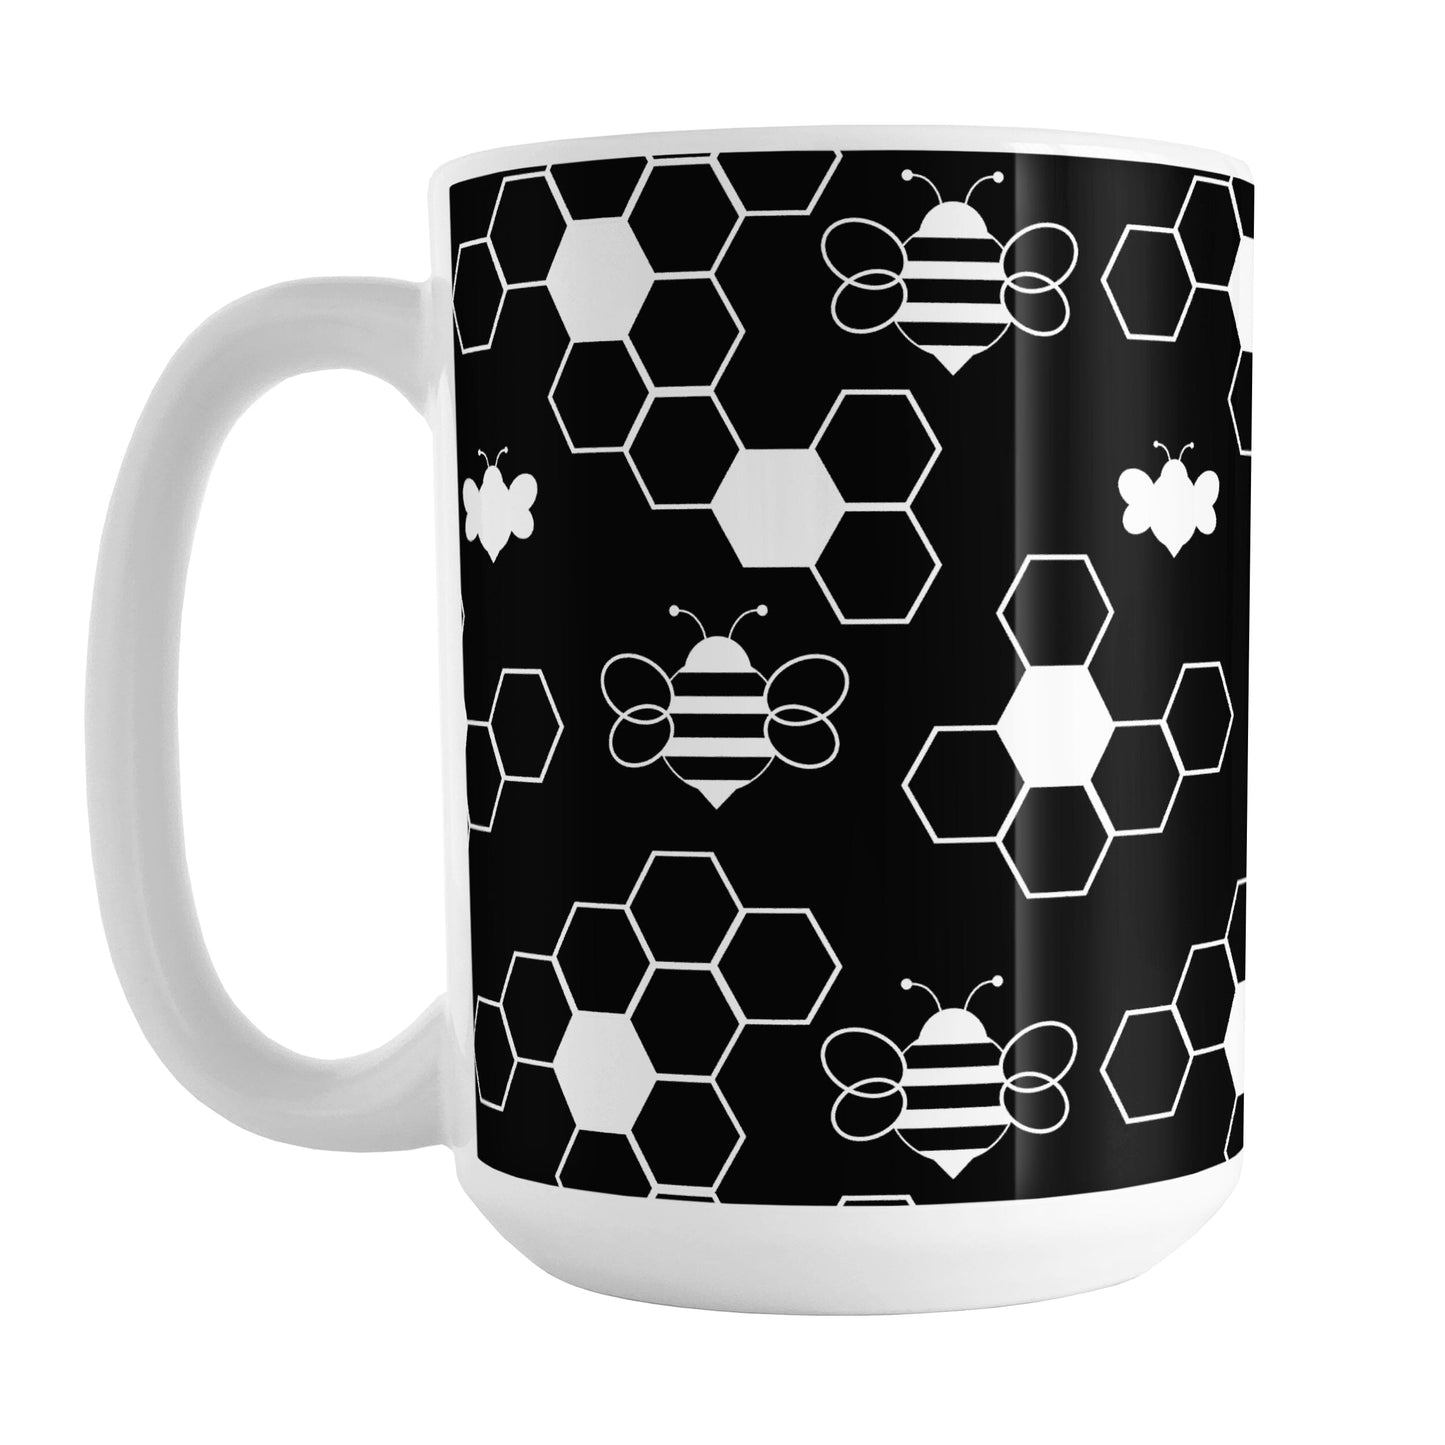 Black and White Bee Mug (15oz) at Amy's Coffee Mugs. A ceramic coffee mug designed with white line and silhouette bees and honeycomb in a sleek pattern over a black background color that wraps around the mug up to the handle.